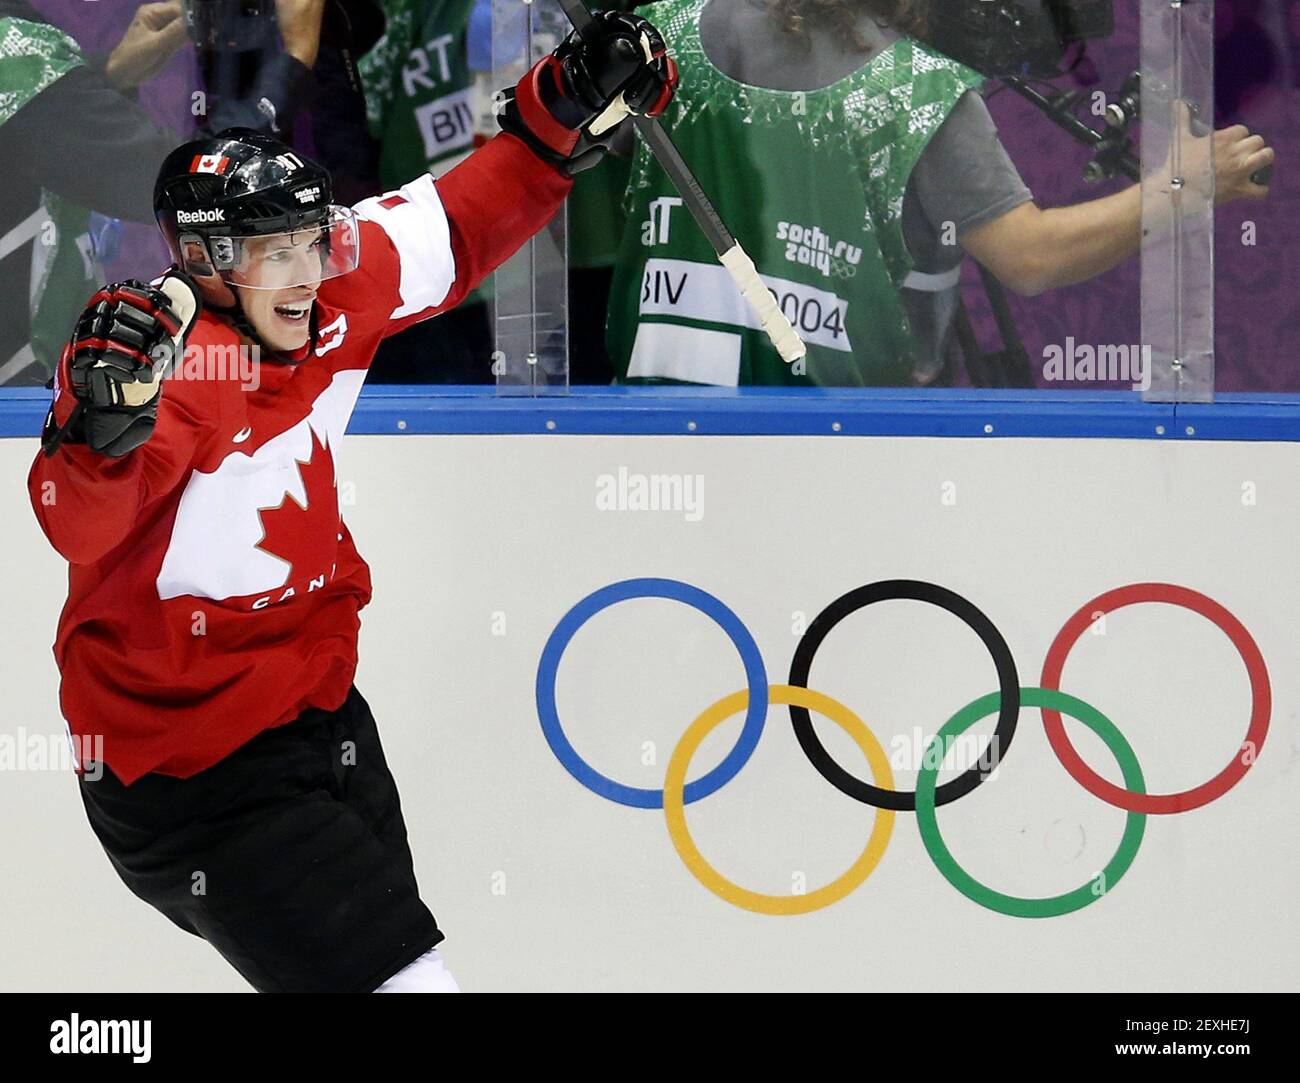 Canada's Sidney Crosby celebrates after scoring a goal at the Winter Olympics in Sochi, Russia, on February 23, 2014. (Photo by Carlos Gonzalez/Minneapolis Star Tribune/TNS/Sipa USA) Stock Photo